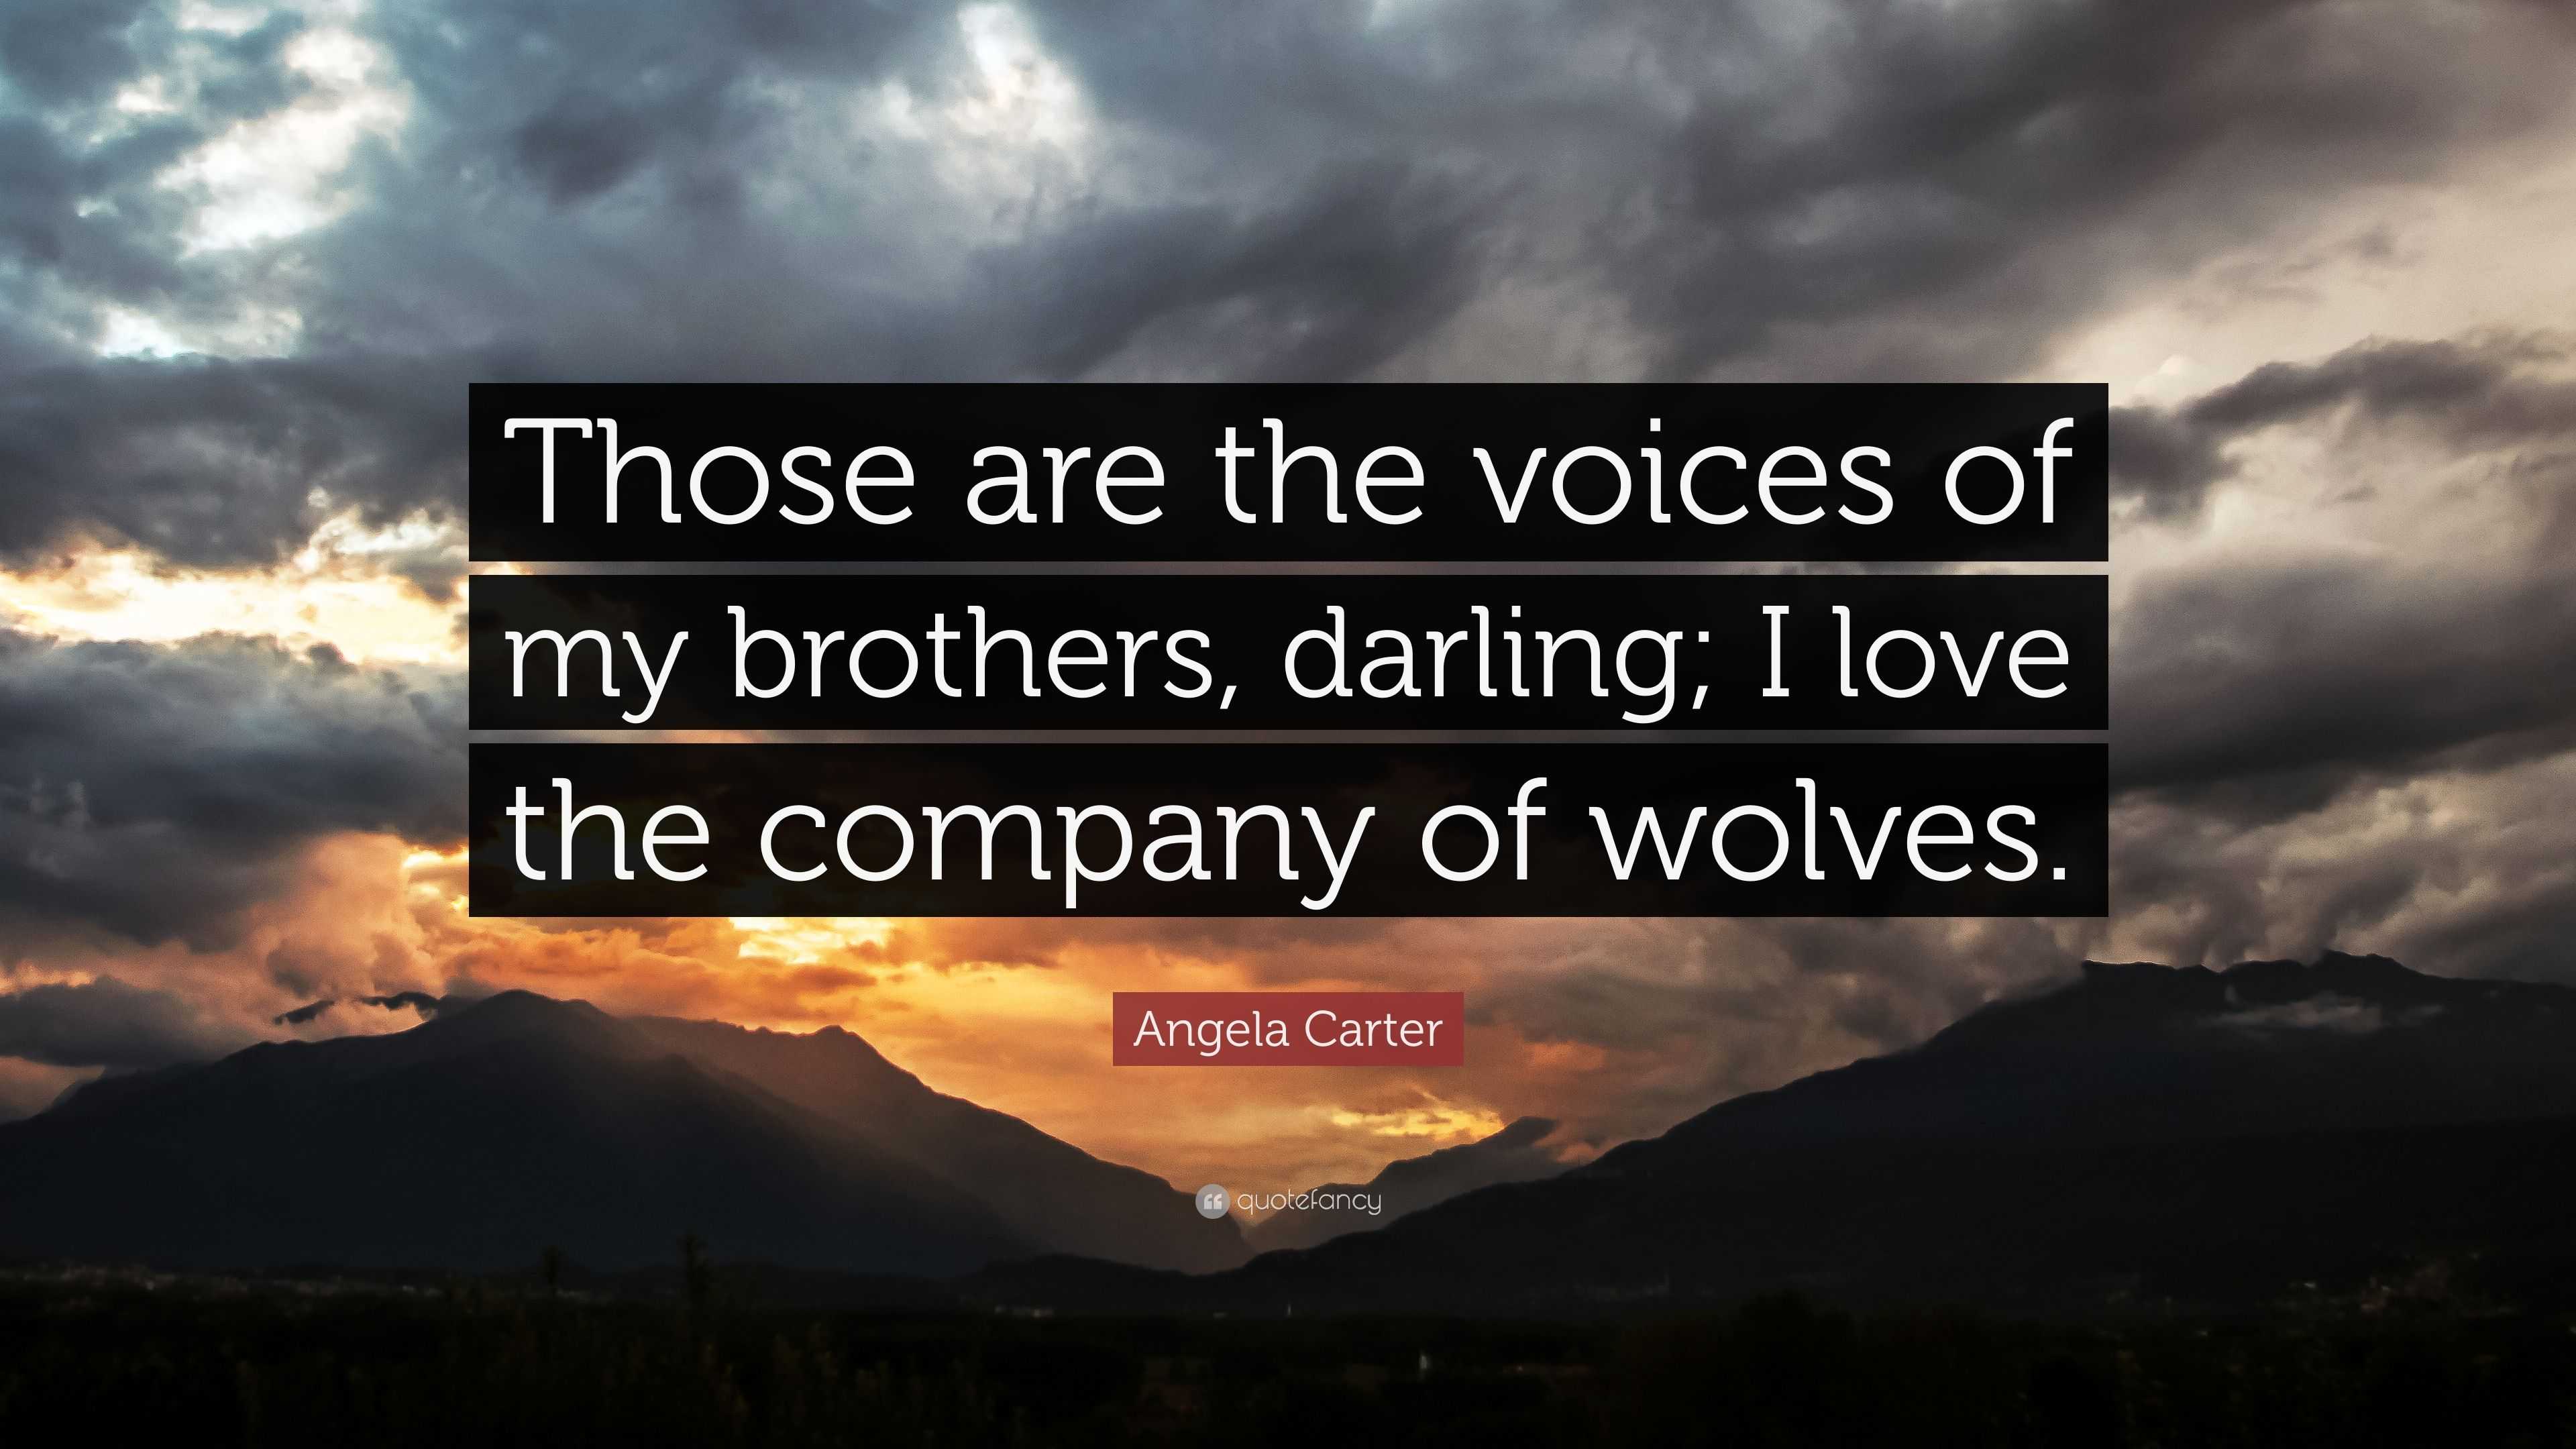 Angela Carter Quote: "Those are the voices of my brothers, darling; I love the company of wolves ...